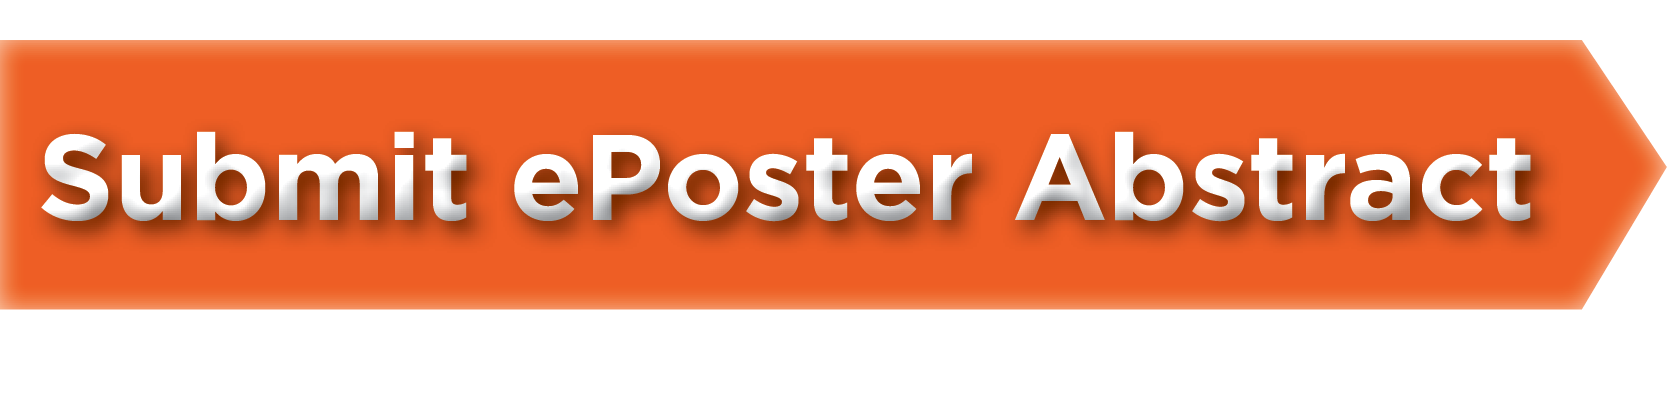 ePoster Abstract